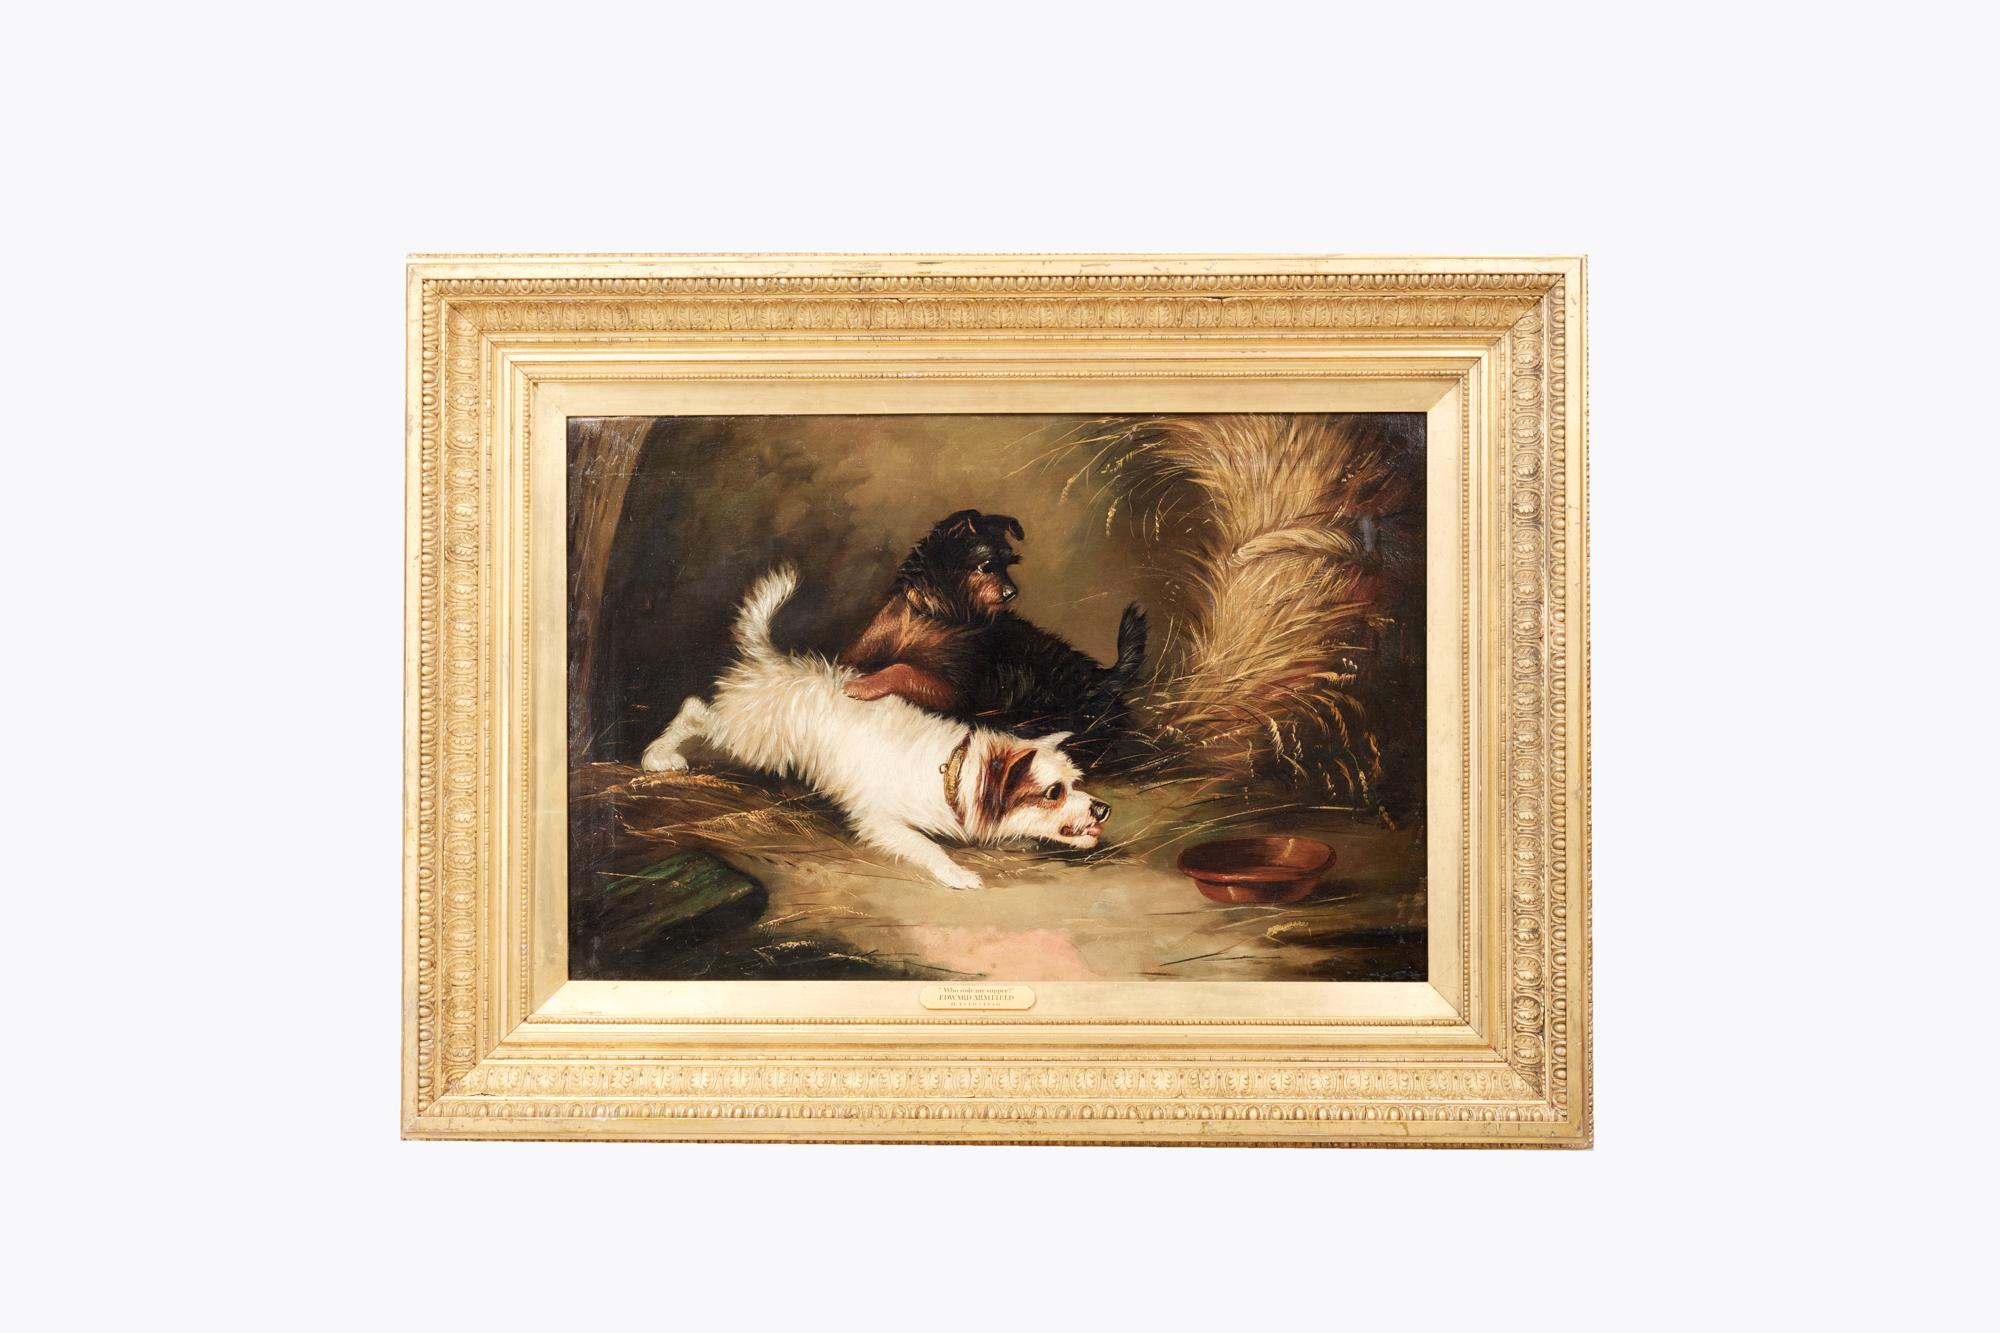 19th Century painting titled 'Who Stole My Supper?' by Edward Armfield (1817-1896)

Well known for his paintings of dogs and brother to artist George Armfield this painting depicts a humorous scene featuring a pair of Terrier dogs in a stable,